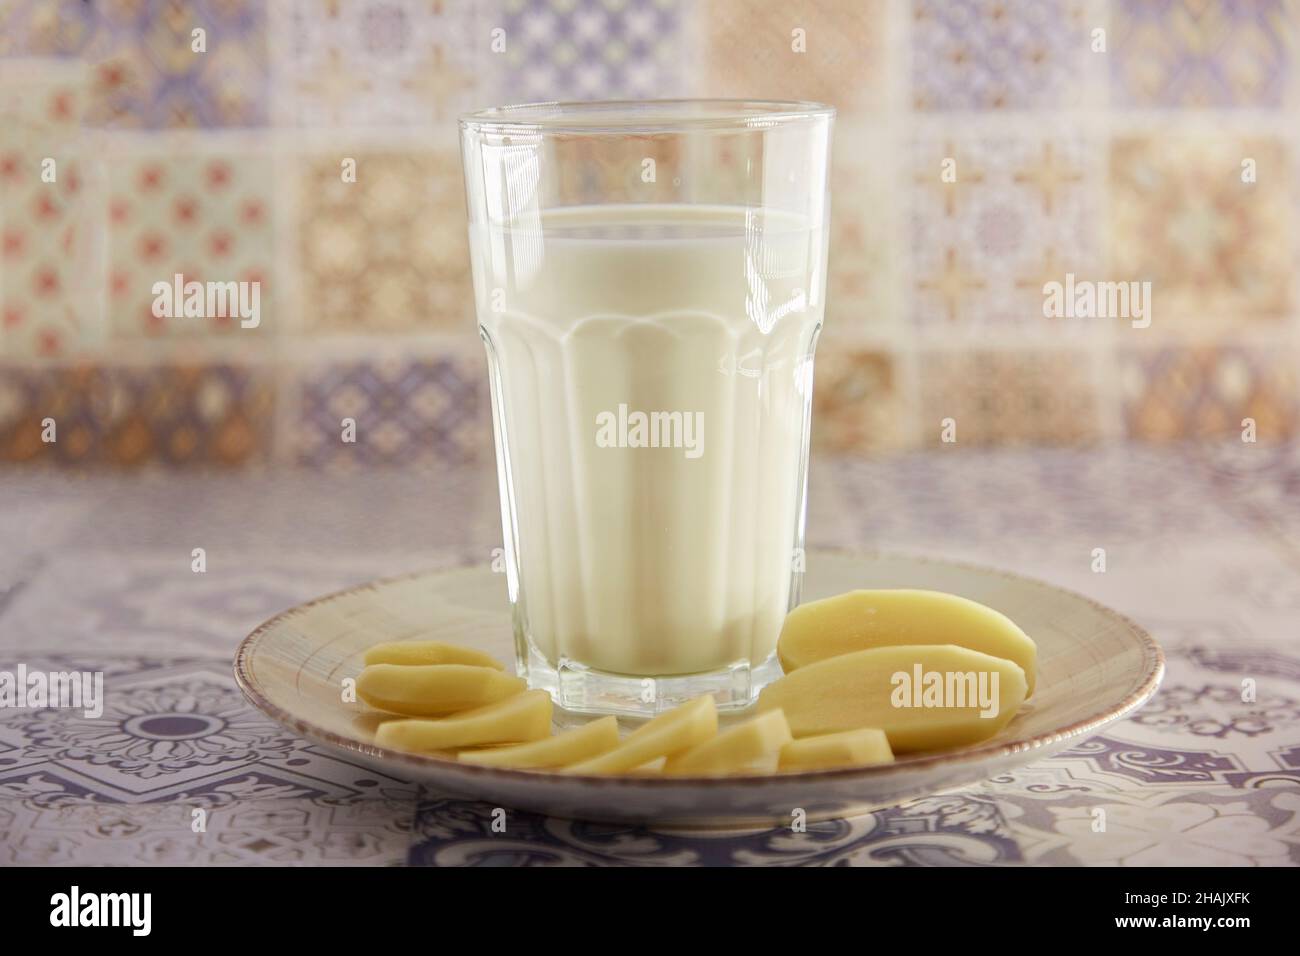 Lactose free, environment friendly potato milk and potato on the plate on the table. Alternative, non-dairy milk. Tile classic background. Copy space. Stock Photo